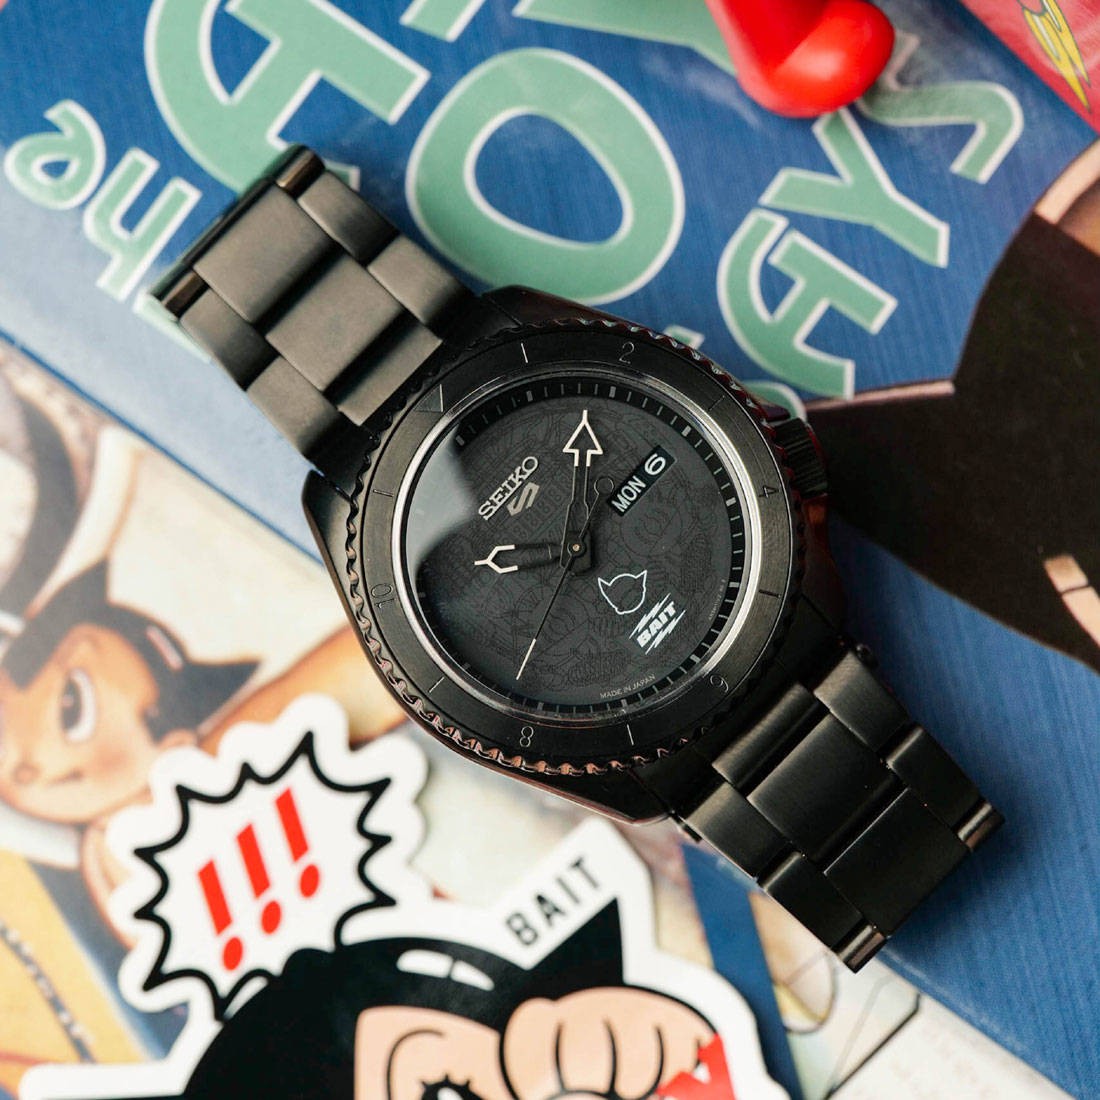 BAIT and Unimatic Link Up on the Quattro Inquisitive Explorer Watch |  Raffle, Cool watches, Minimalist watch